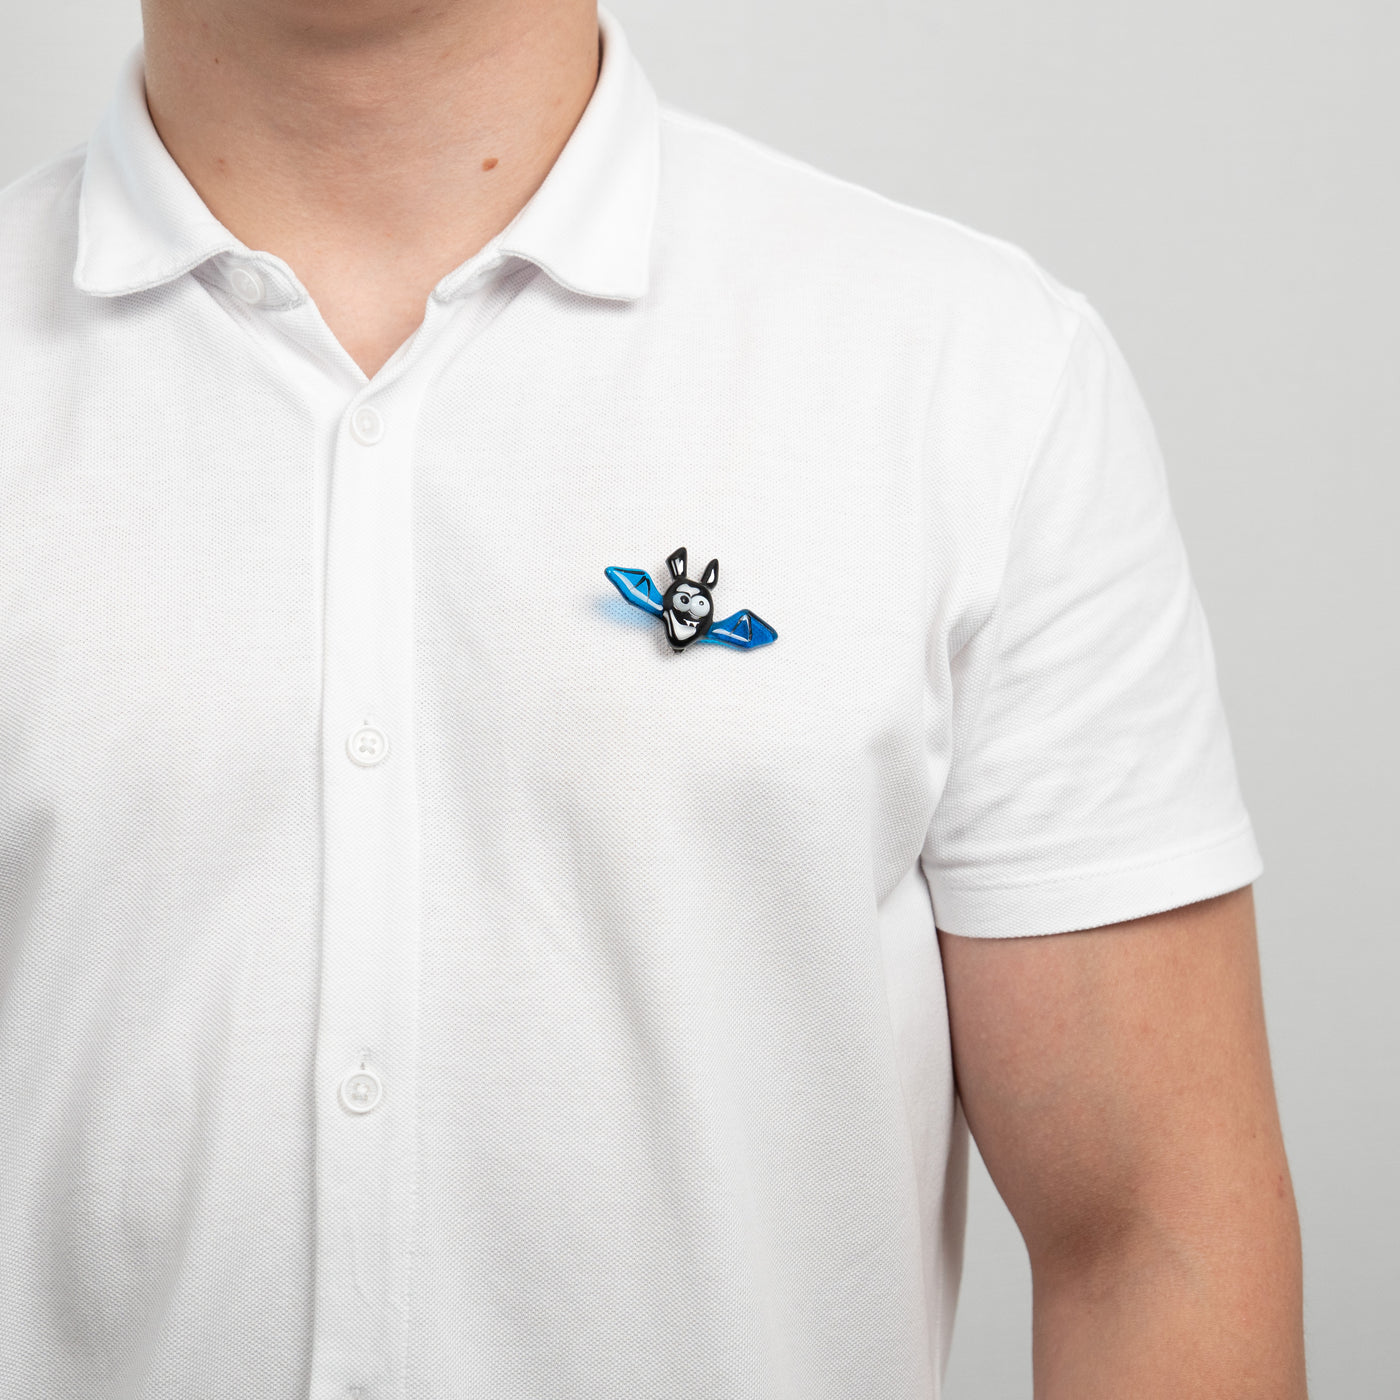 Stained glass blue bat brooch on a shirt